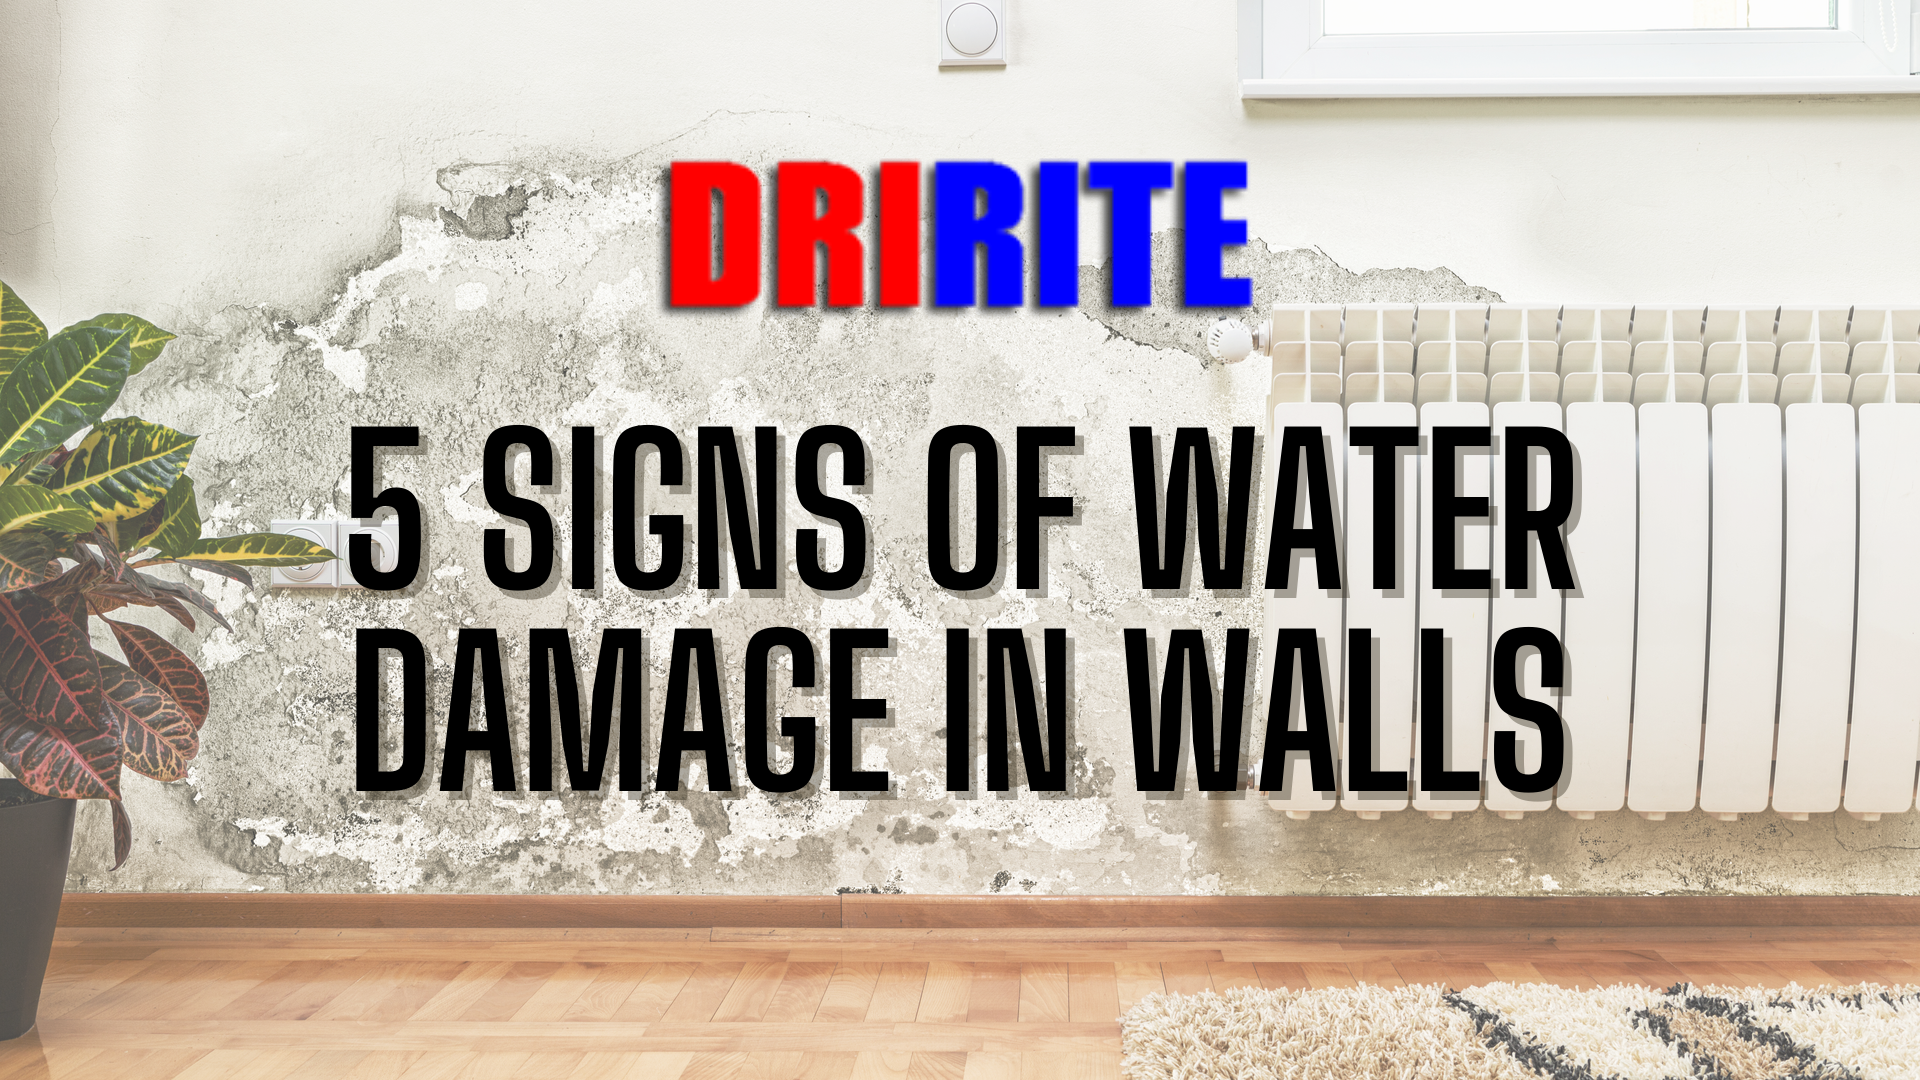 5 Signs of Water Damage in Walls (1)